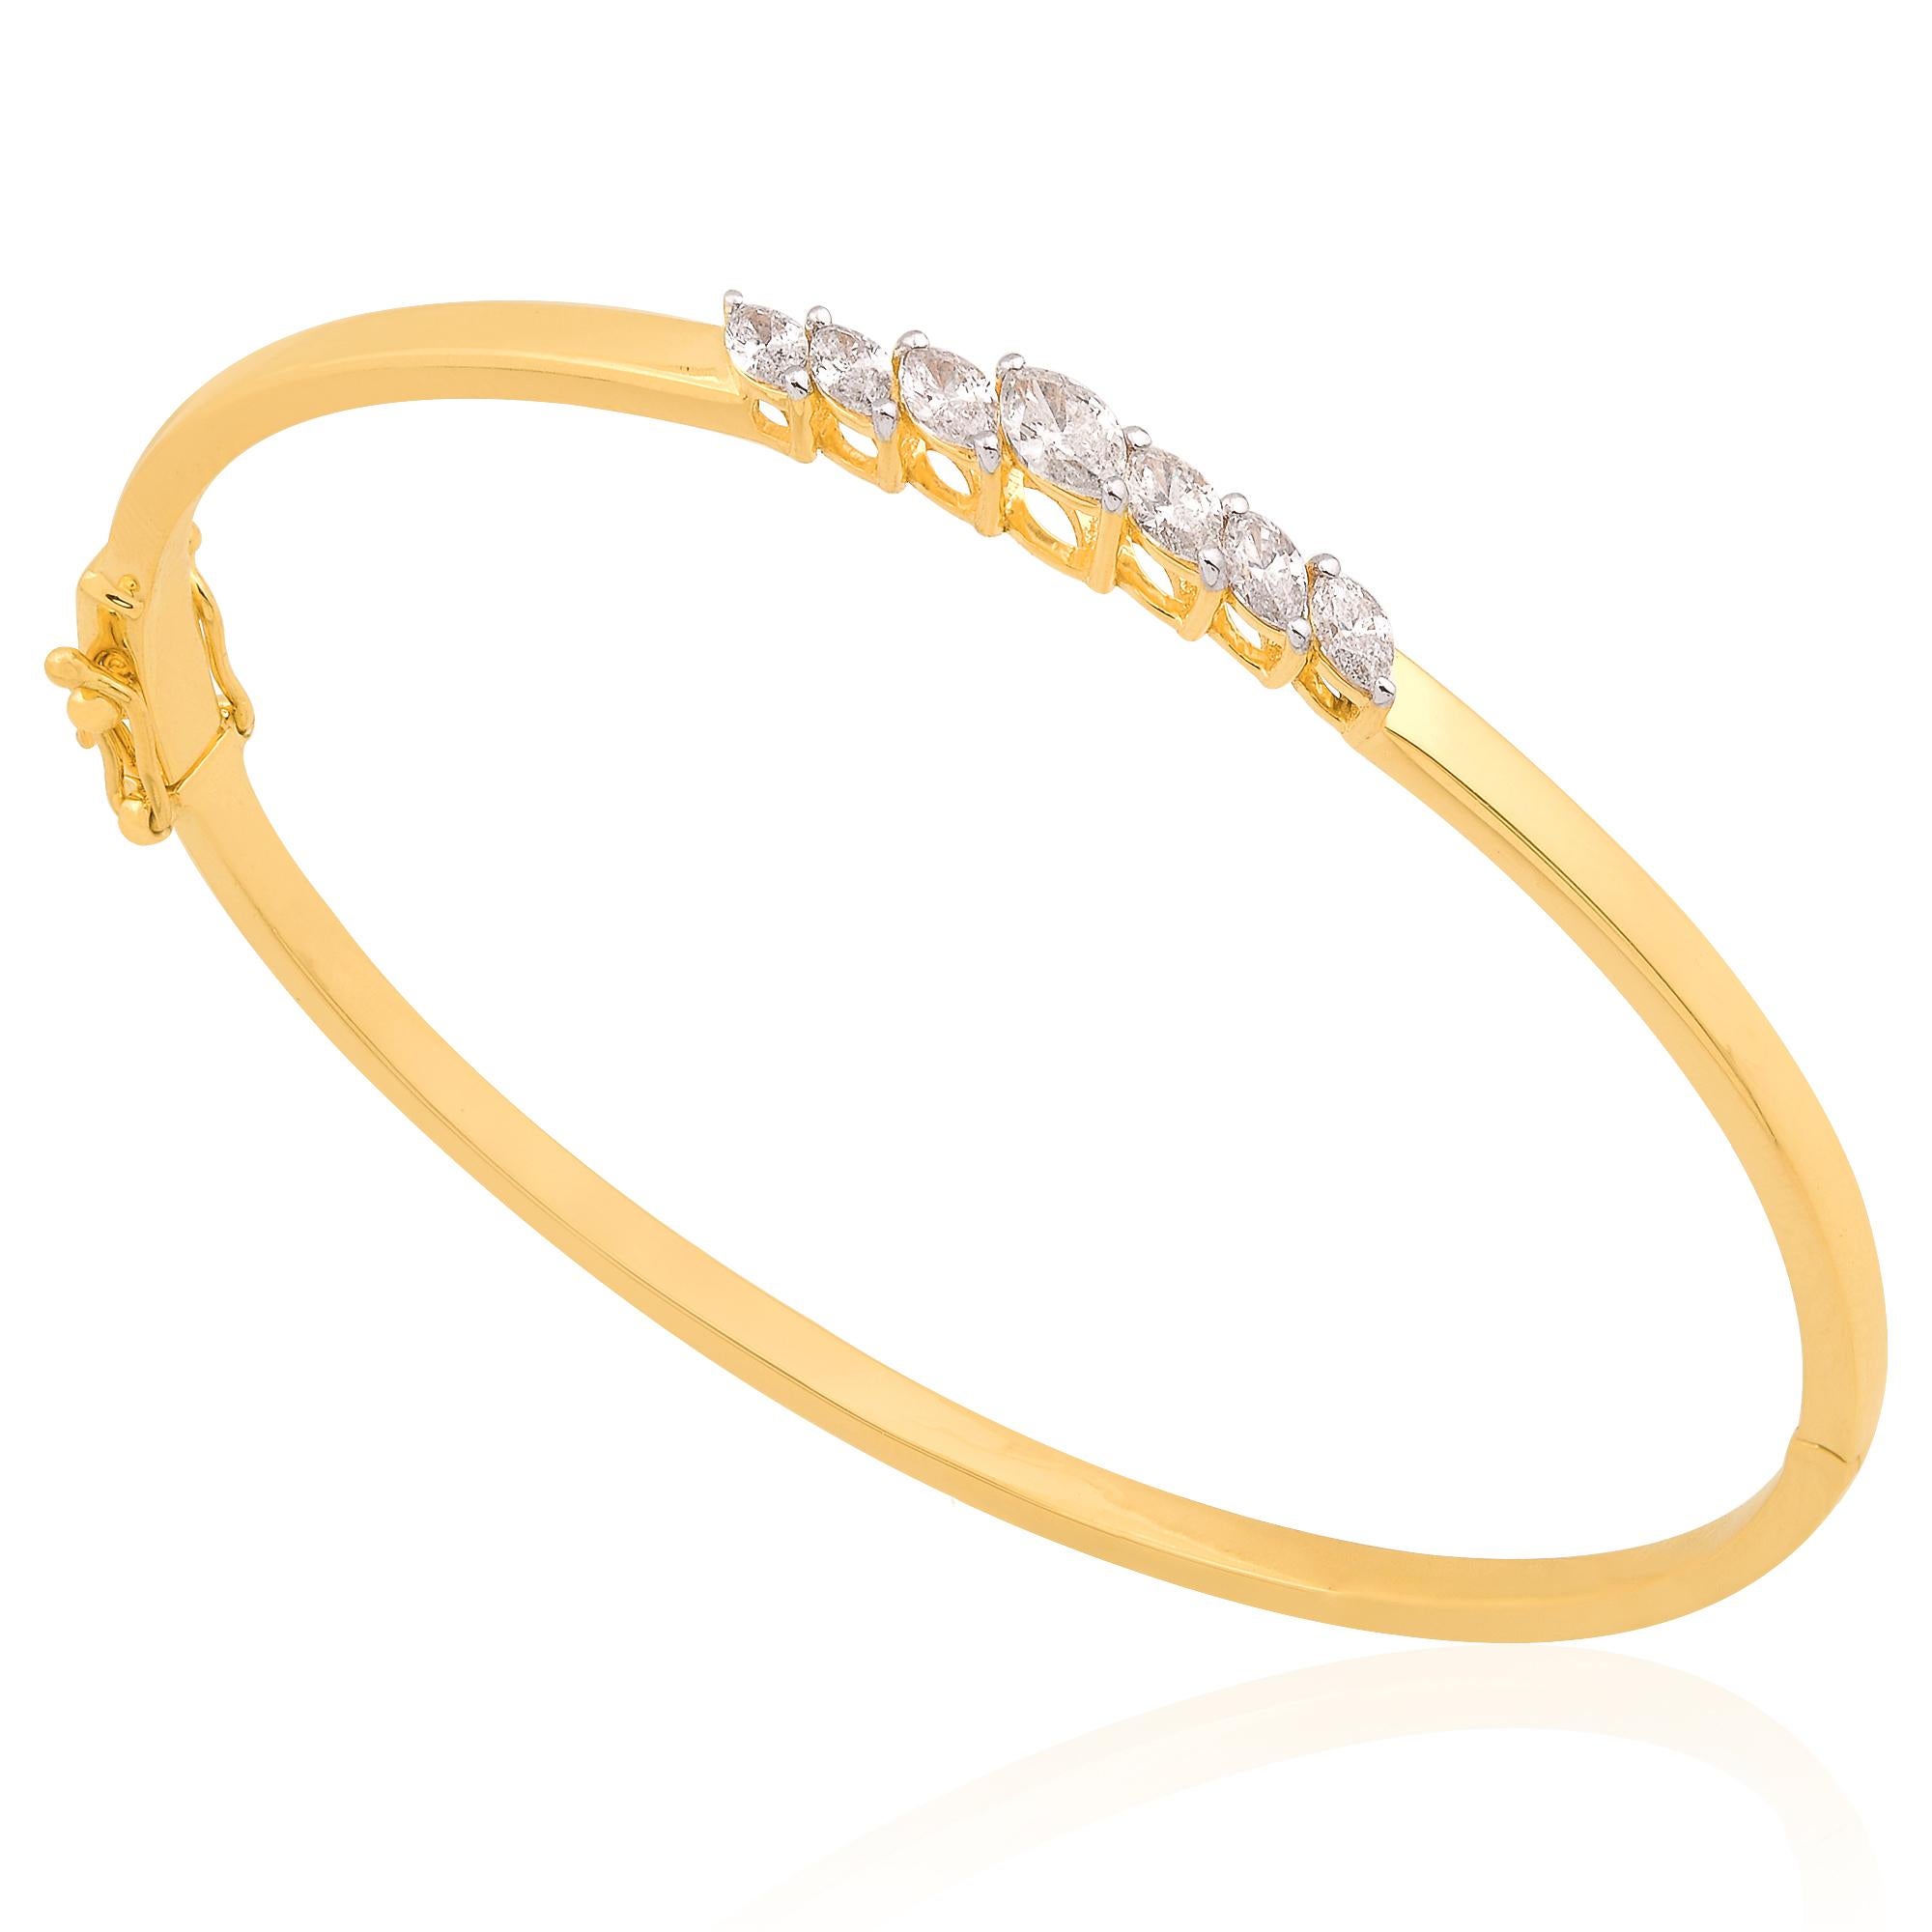 The focal point of this stunning bracelet is the mesmerizing marquise-cut diamond, weighing 0.60 carats, carefully set in a secure and captivating manner. Its elongated shape exudes grace and sophistication, while its brilliant facets catch the